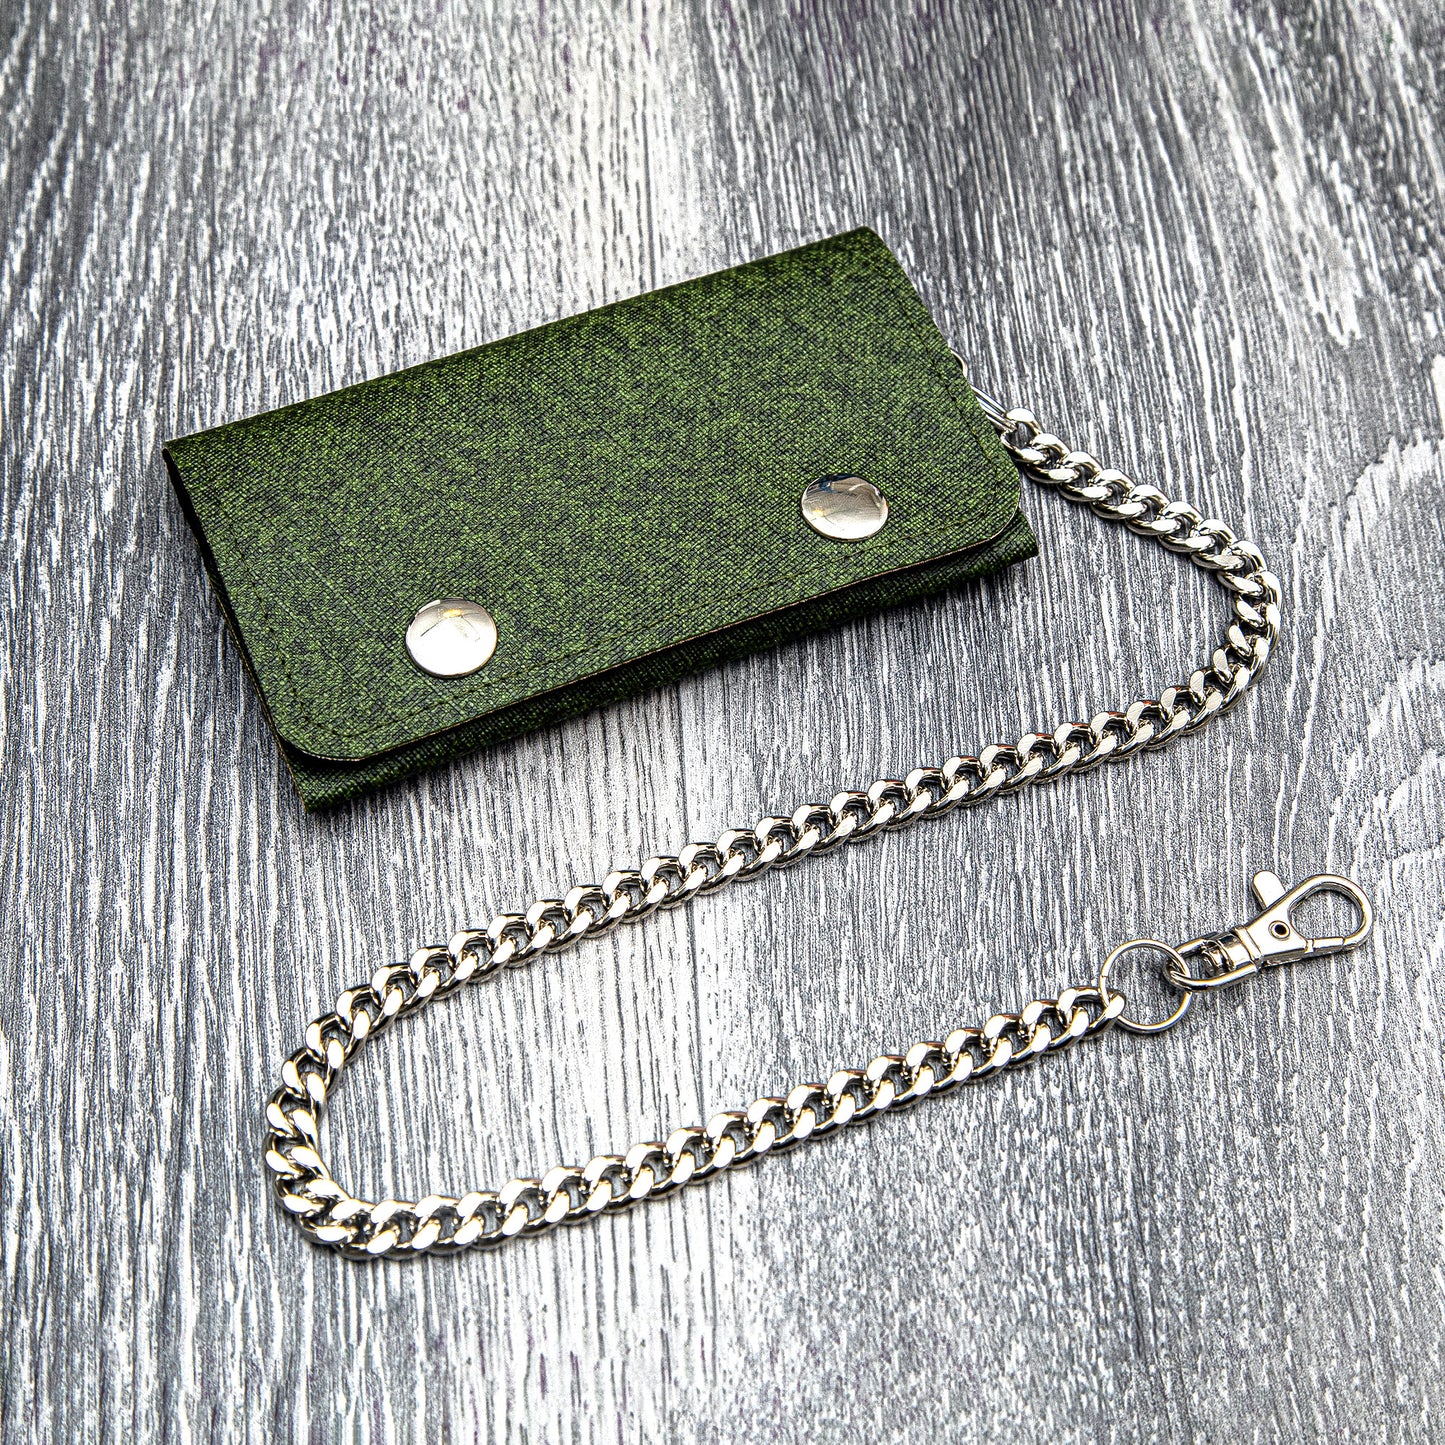 Handcrafted Biker Wallet with Detachable Chain - Cruelty-Free and Fashionably Functional - Olive Green Faux Leather